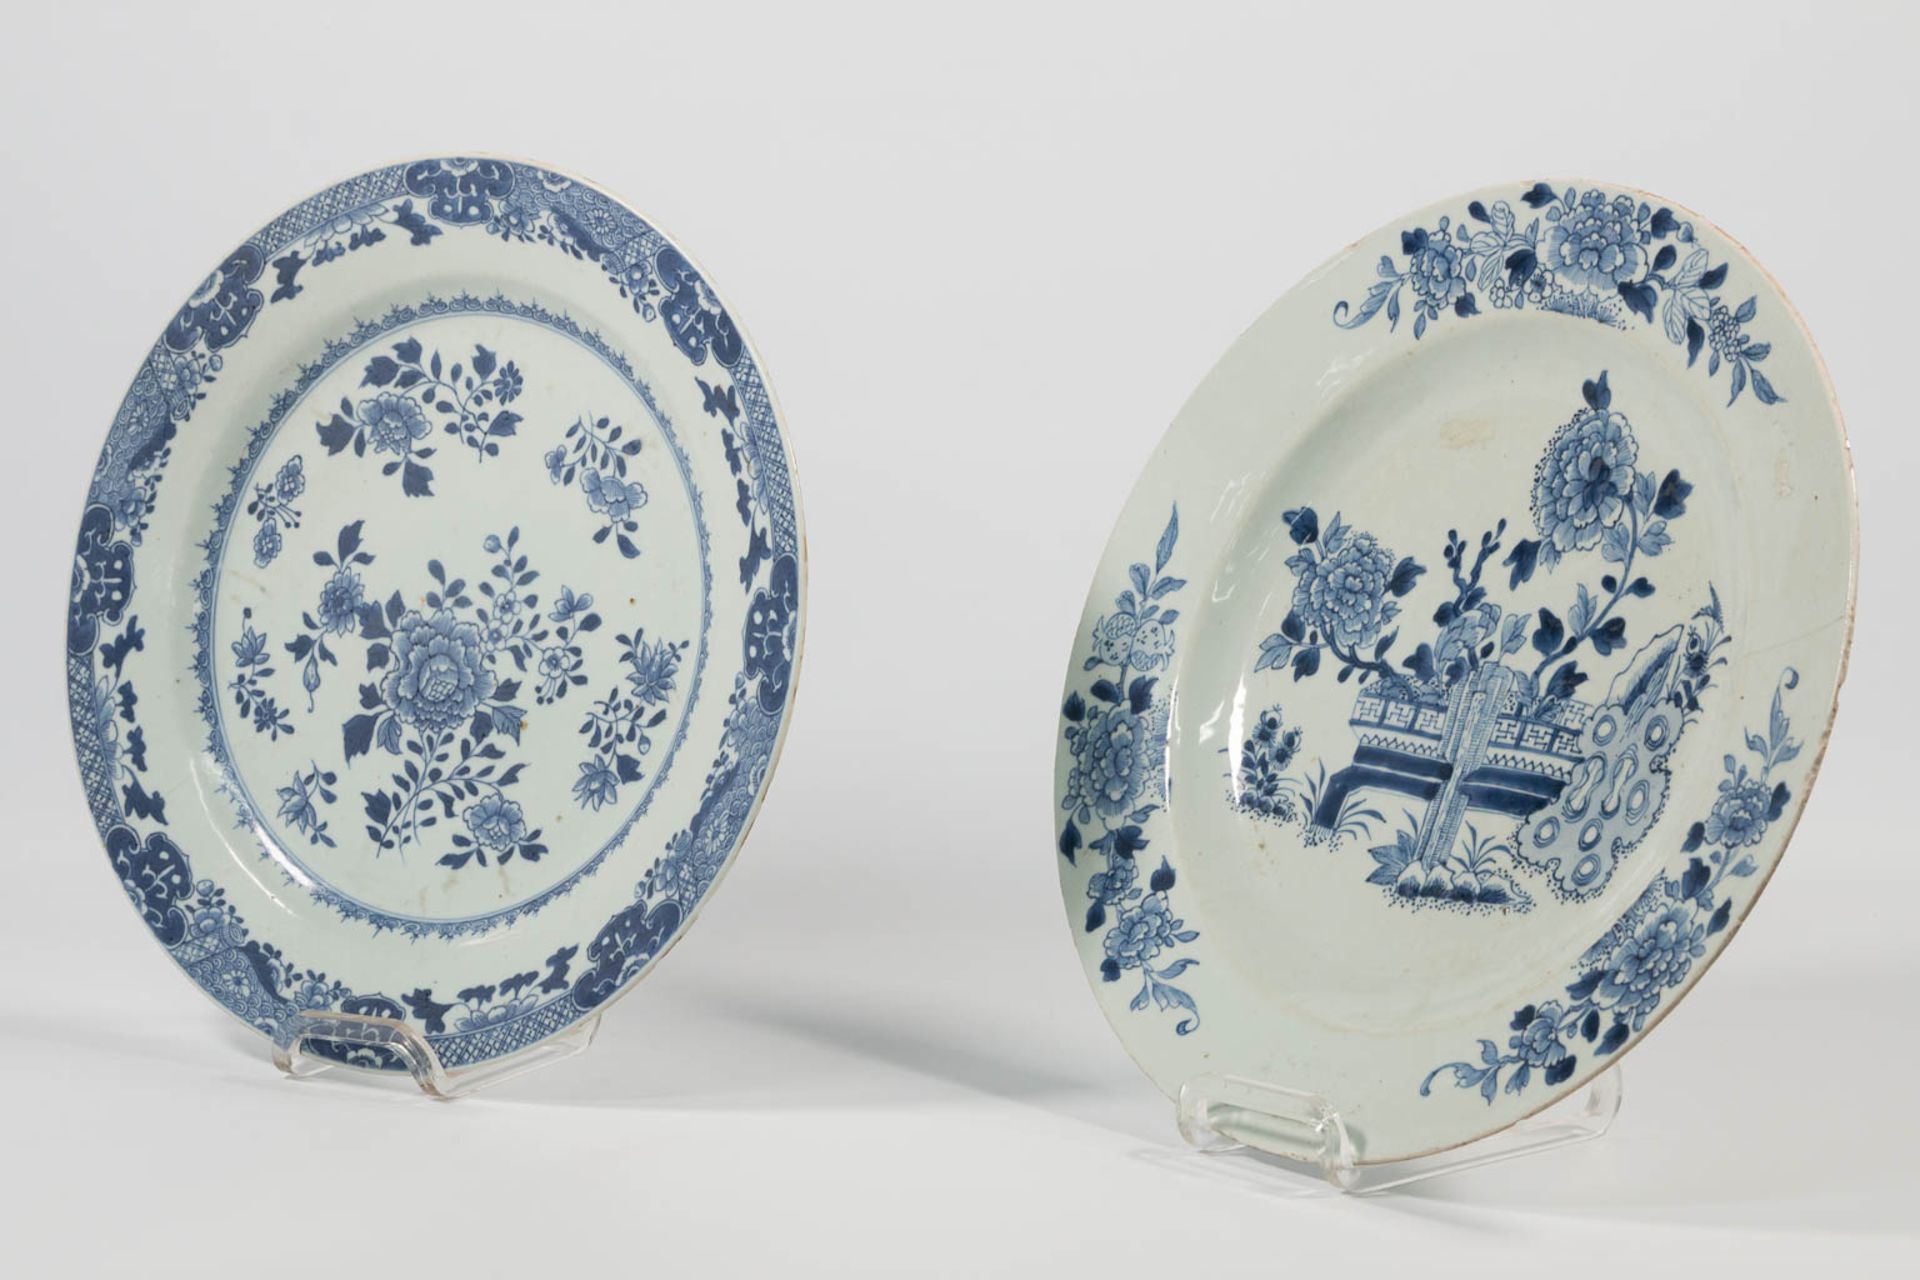 A blue and white Chinese Vase with symbolic decor, combined with 2 blue and white porcelain plates. - Image 30 of 33